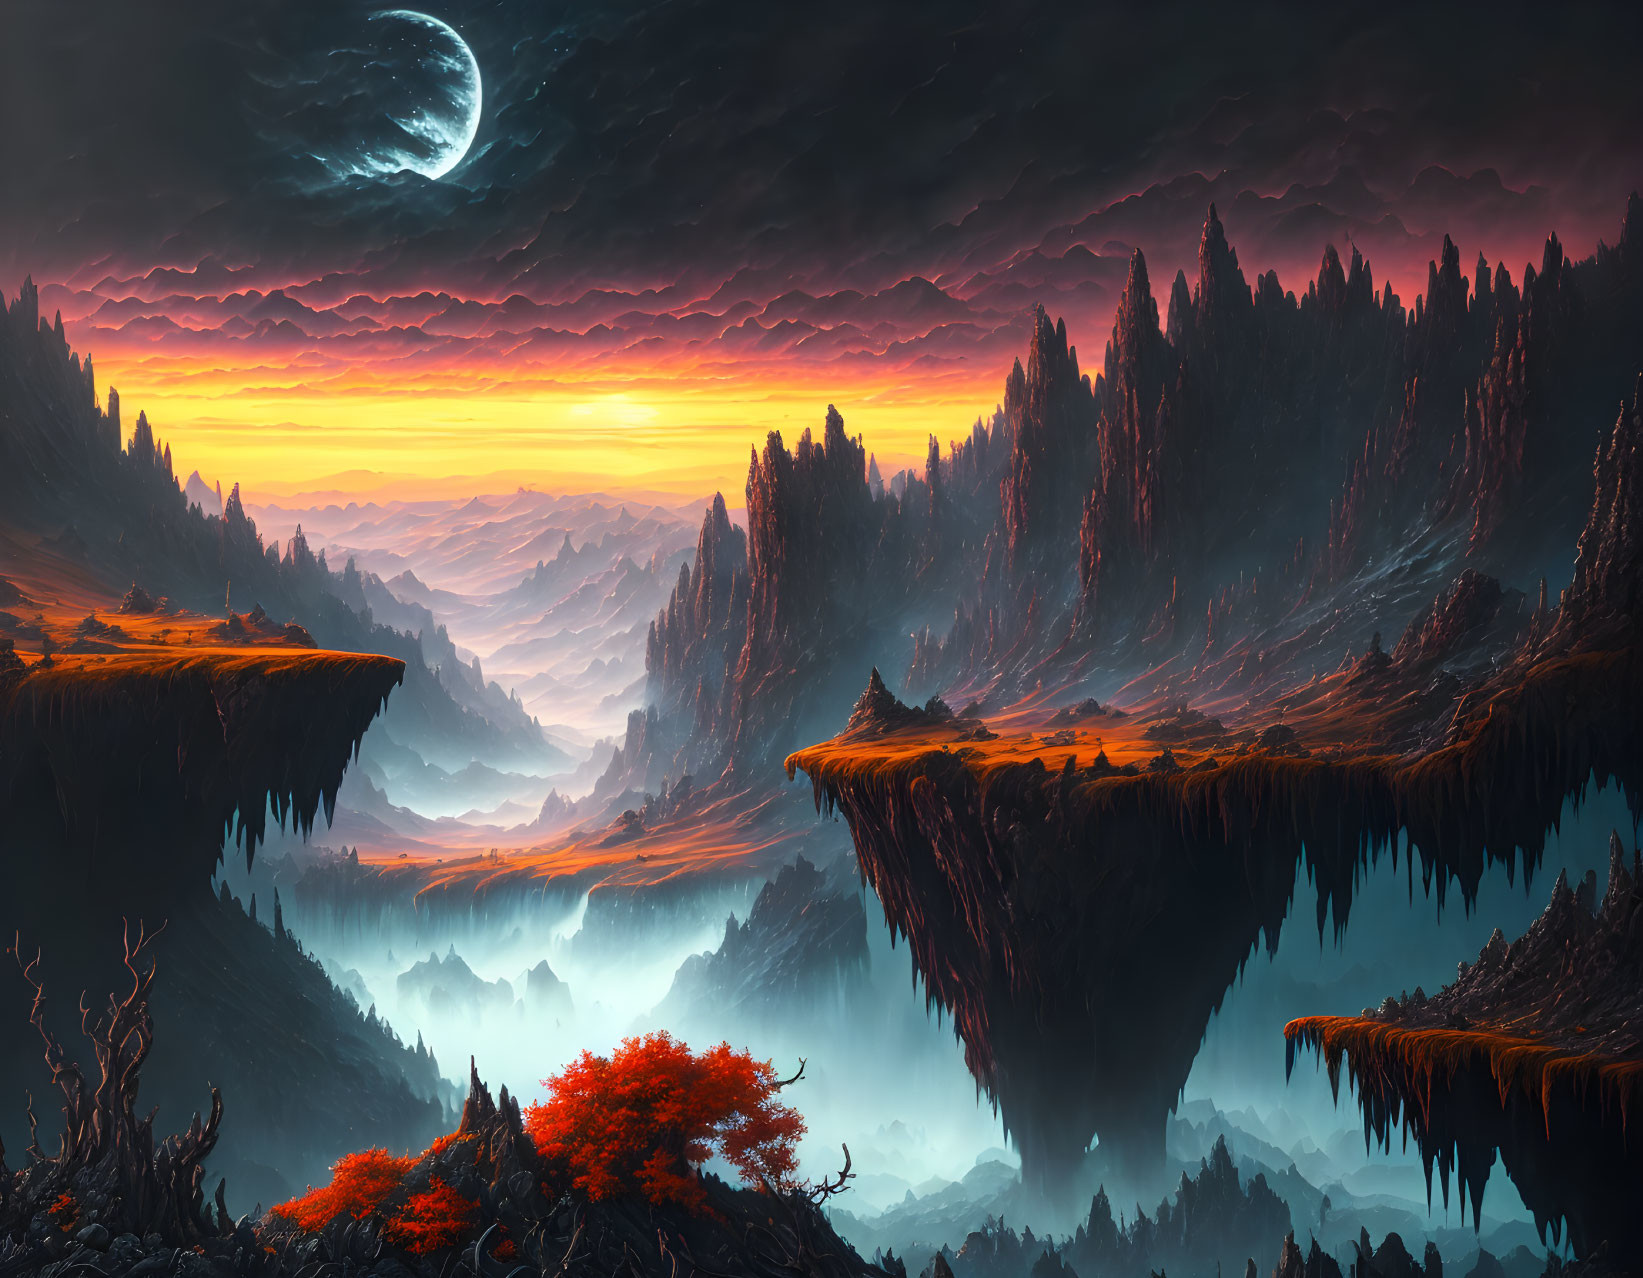 Fantastical landscape with floating islands, vibrant sunset hues, crescent moon, and fiery red foliage